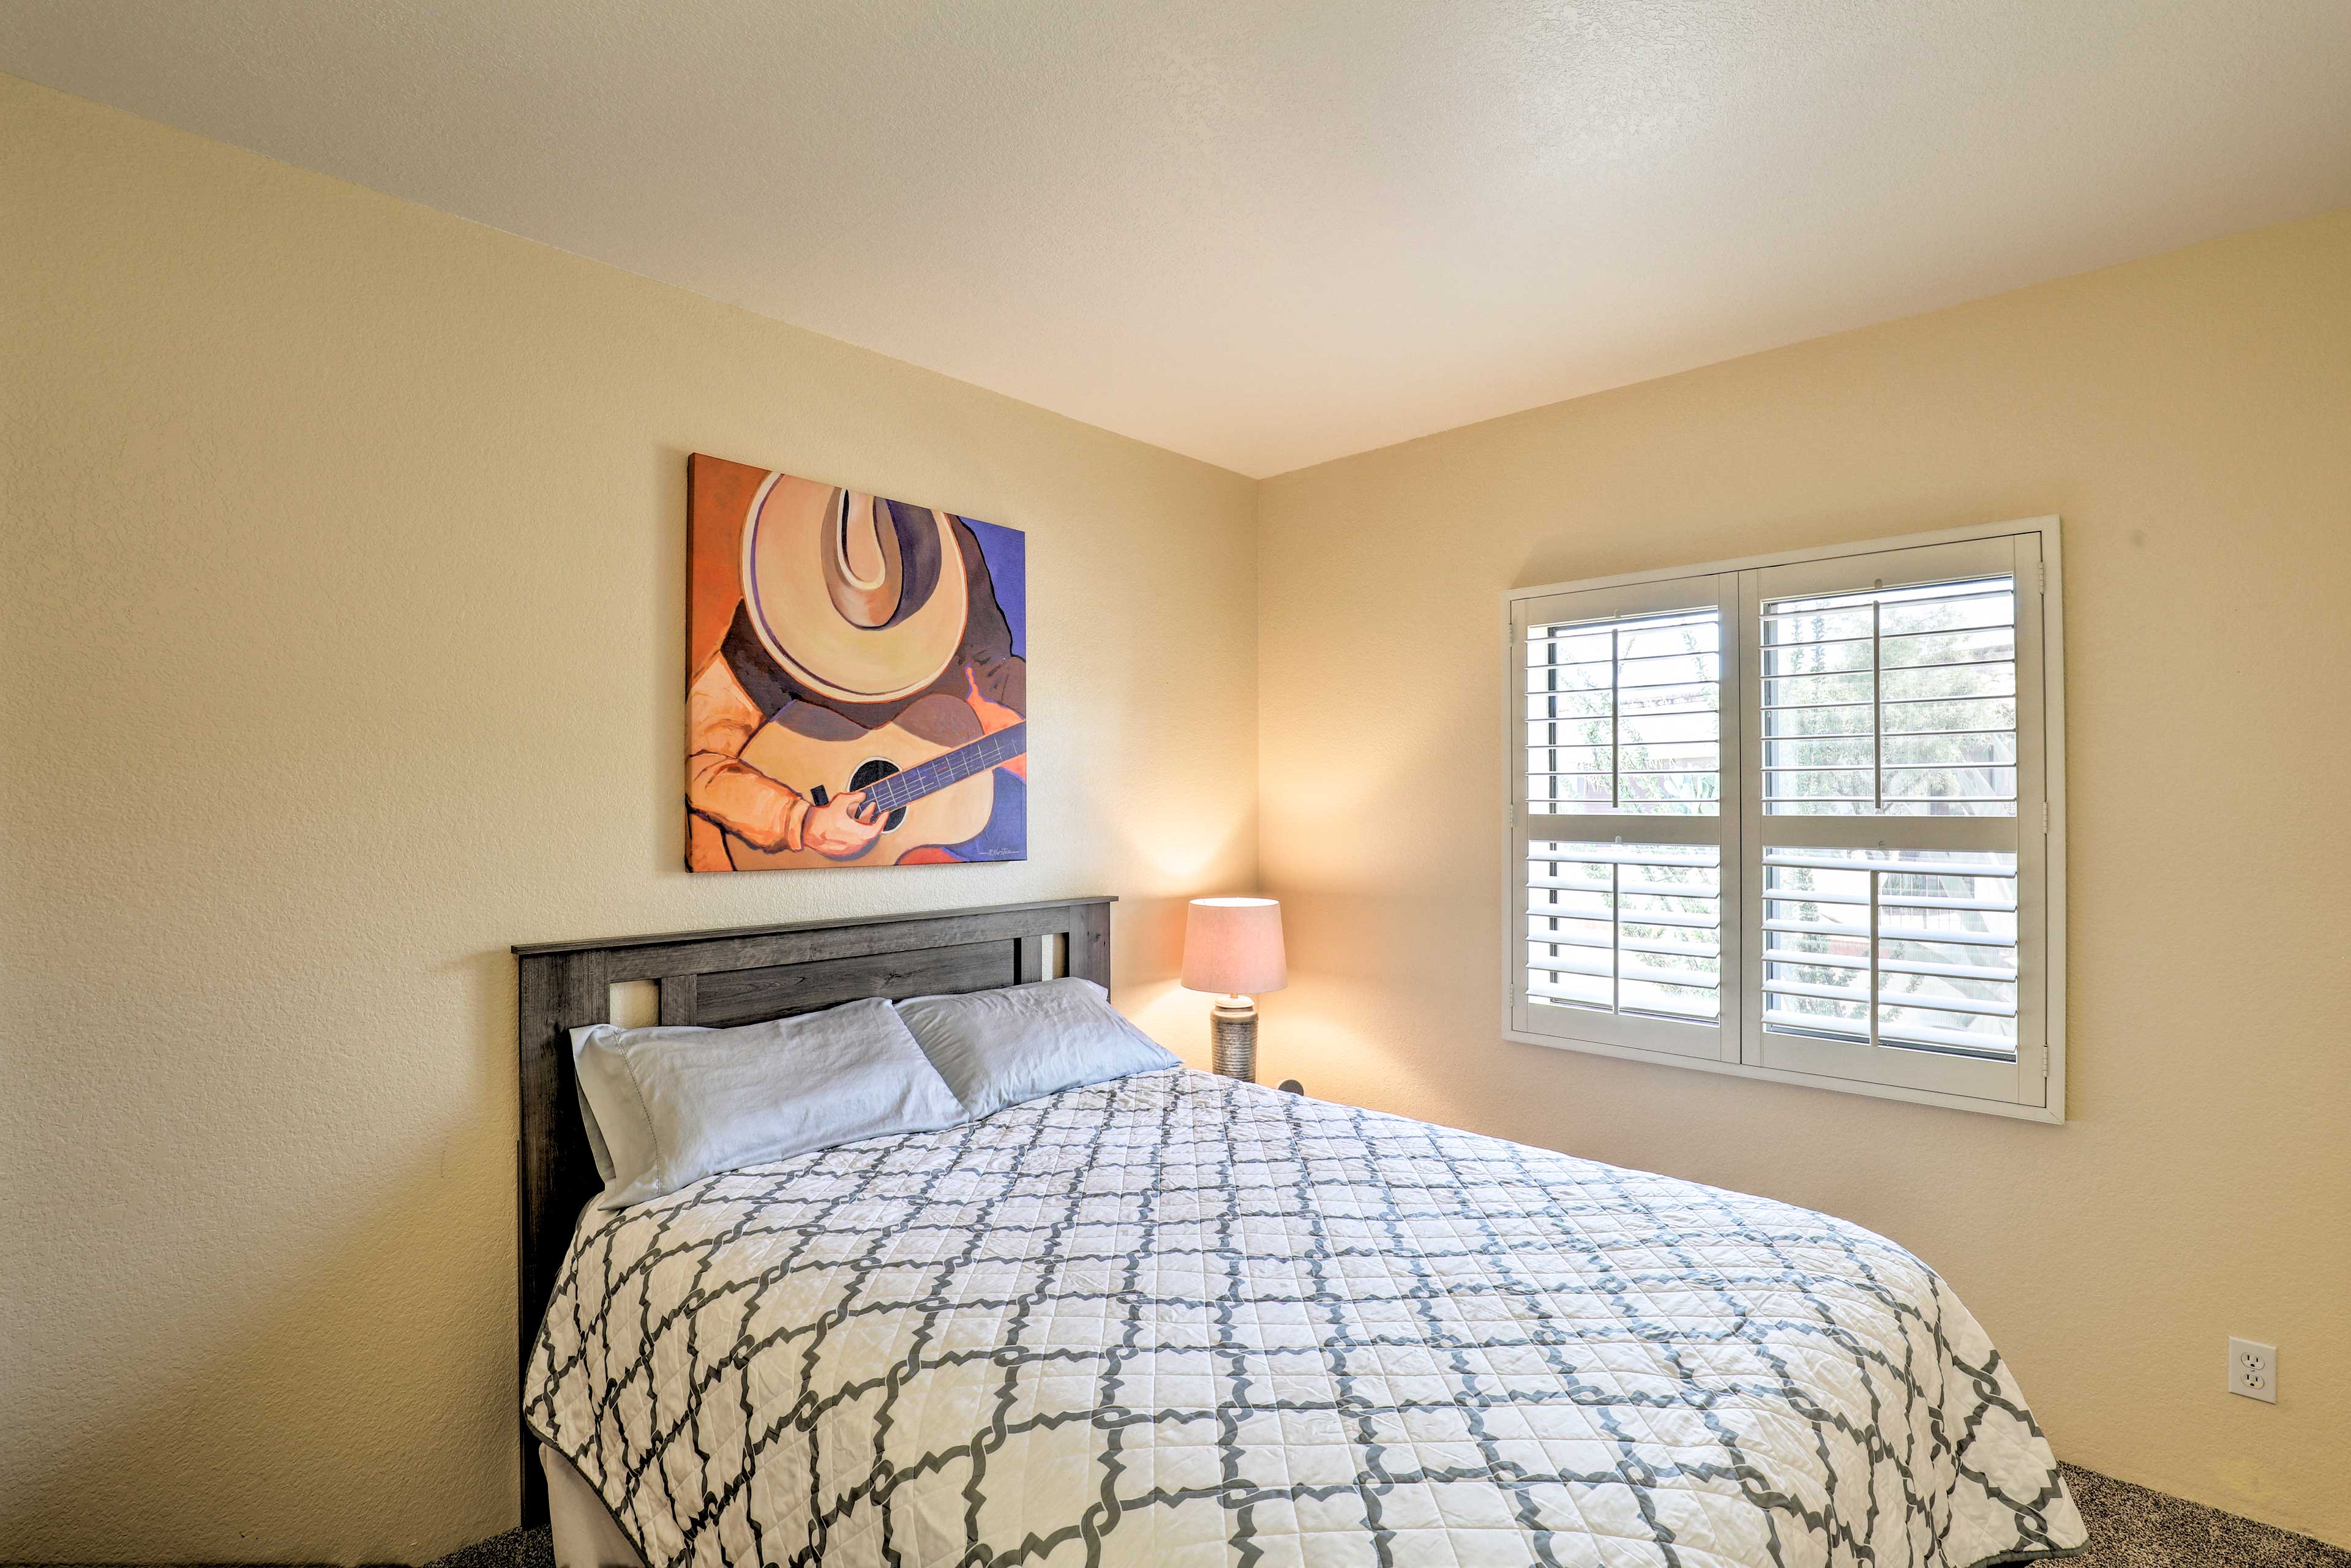 The second bedroom offers a queen-sized bed.